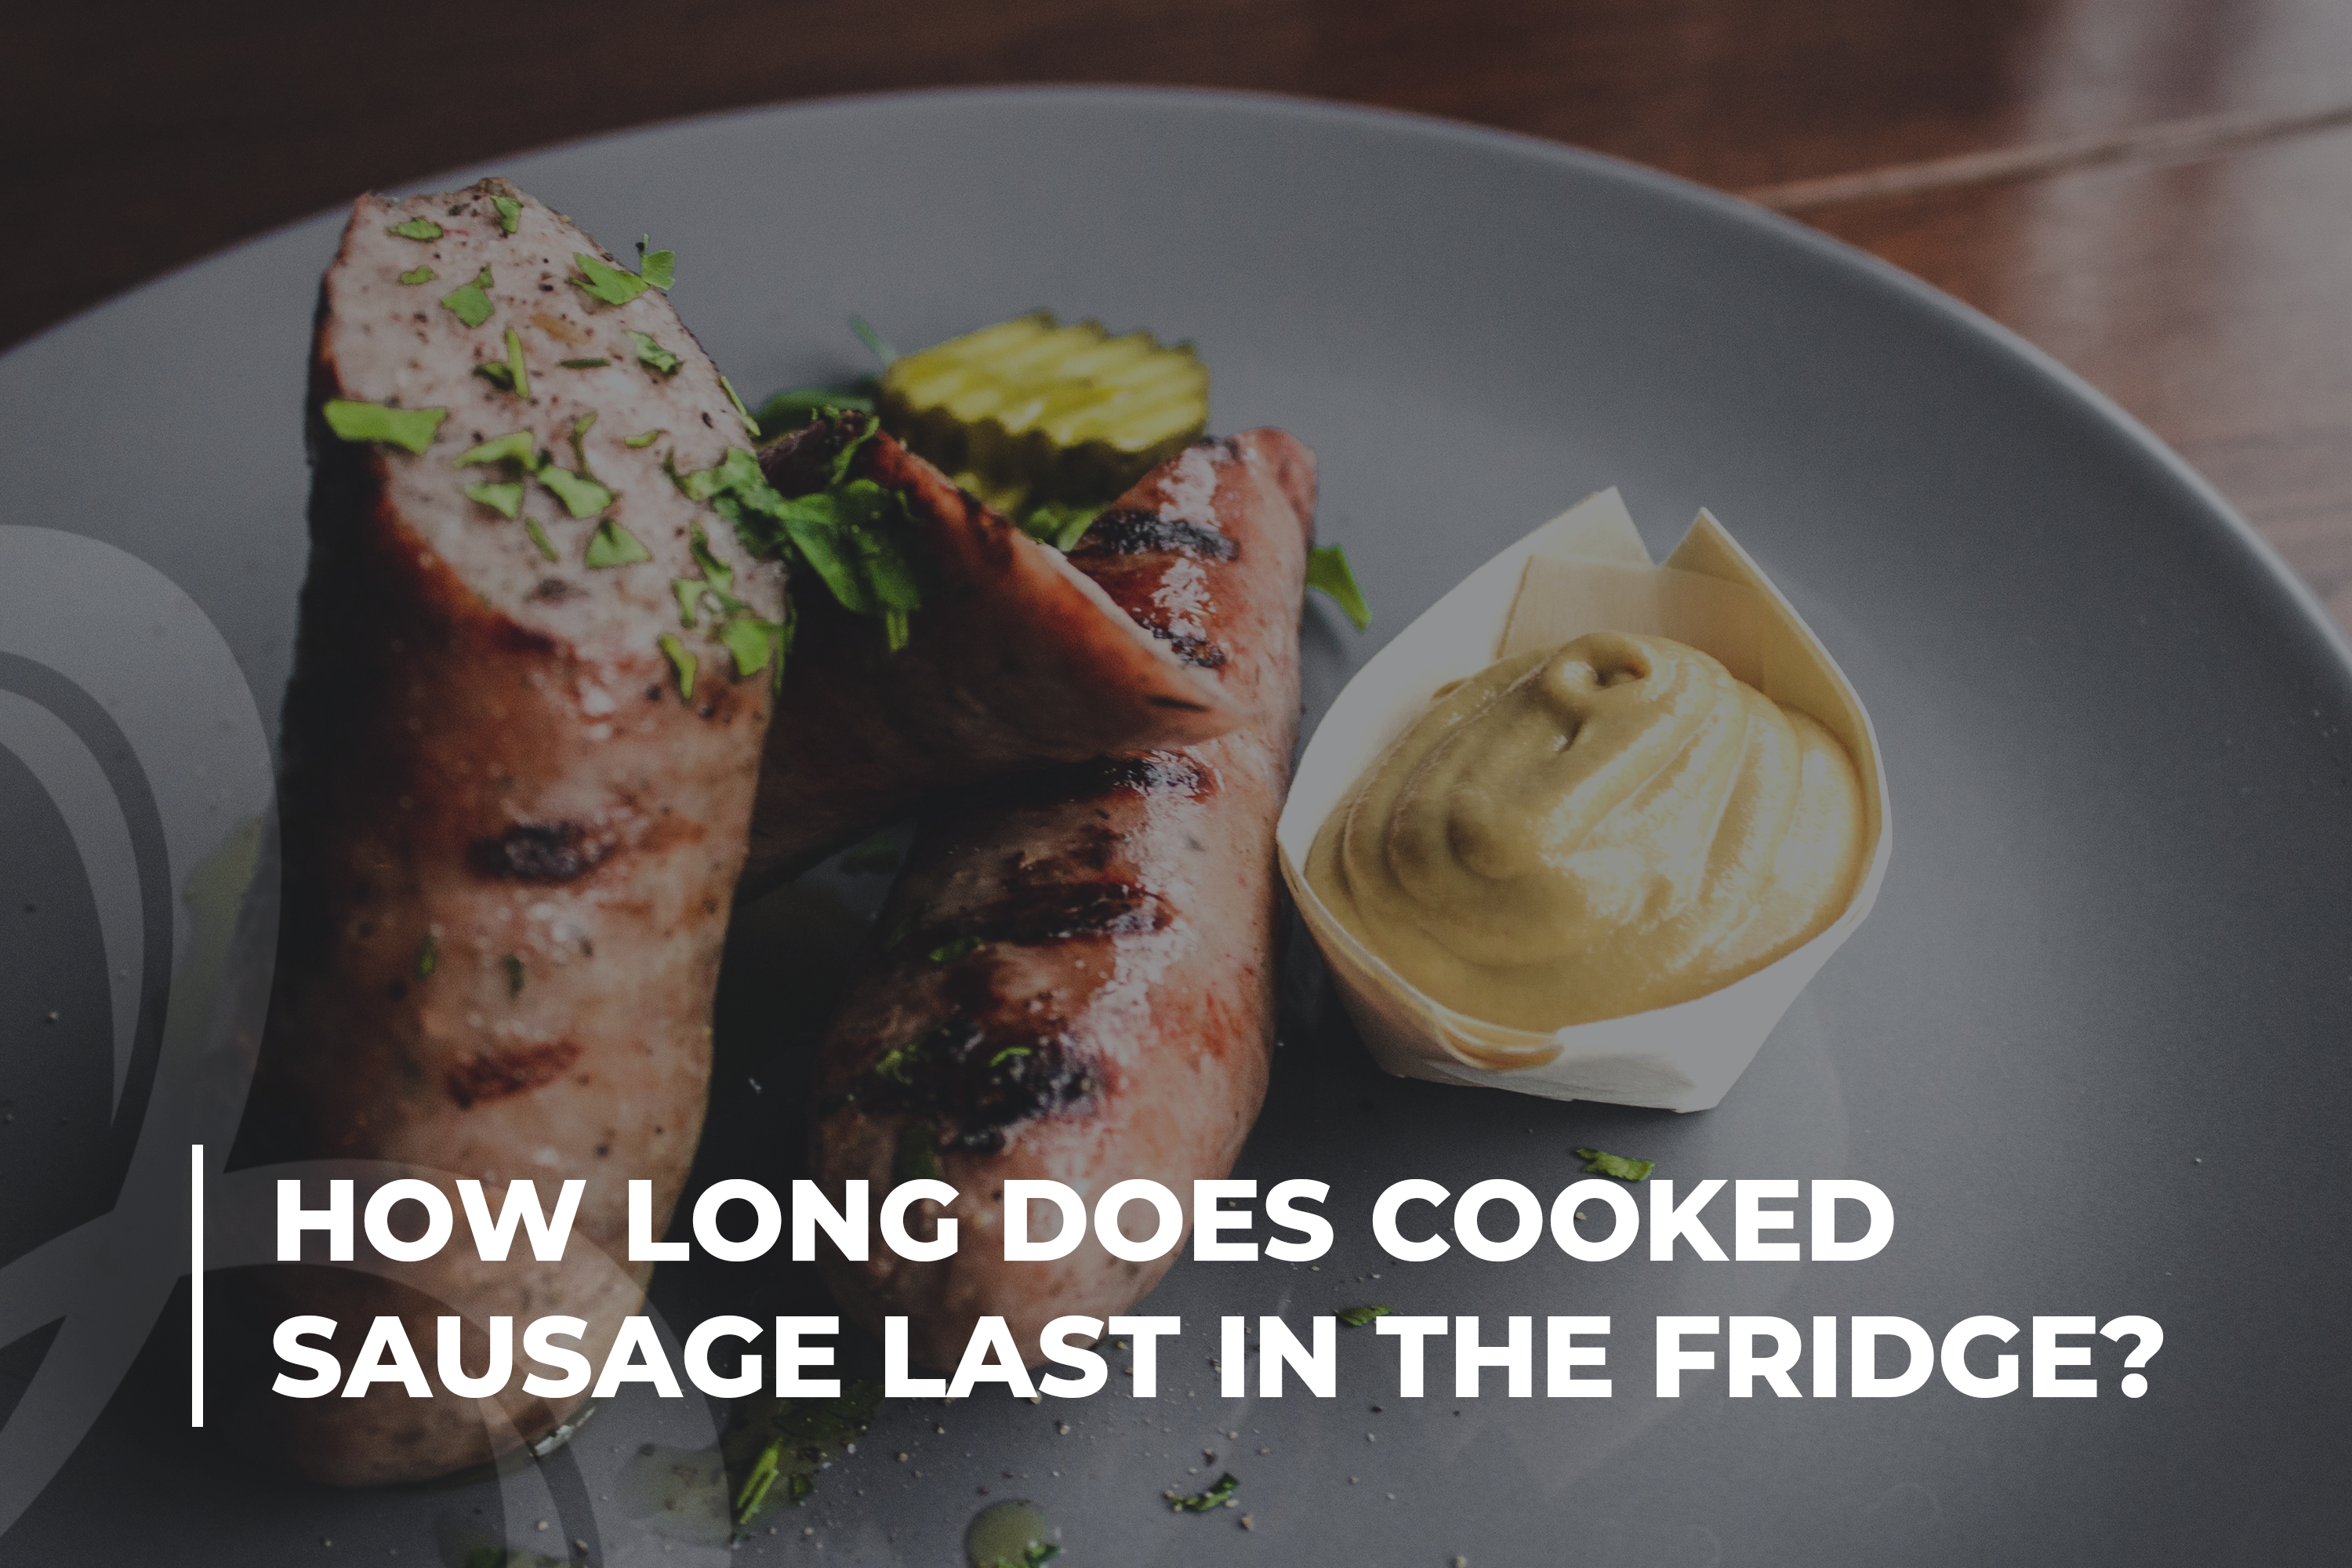 How Long Does Cooked Sausage Last In The Fridge